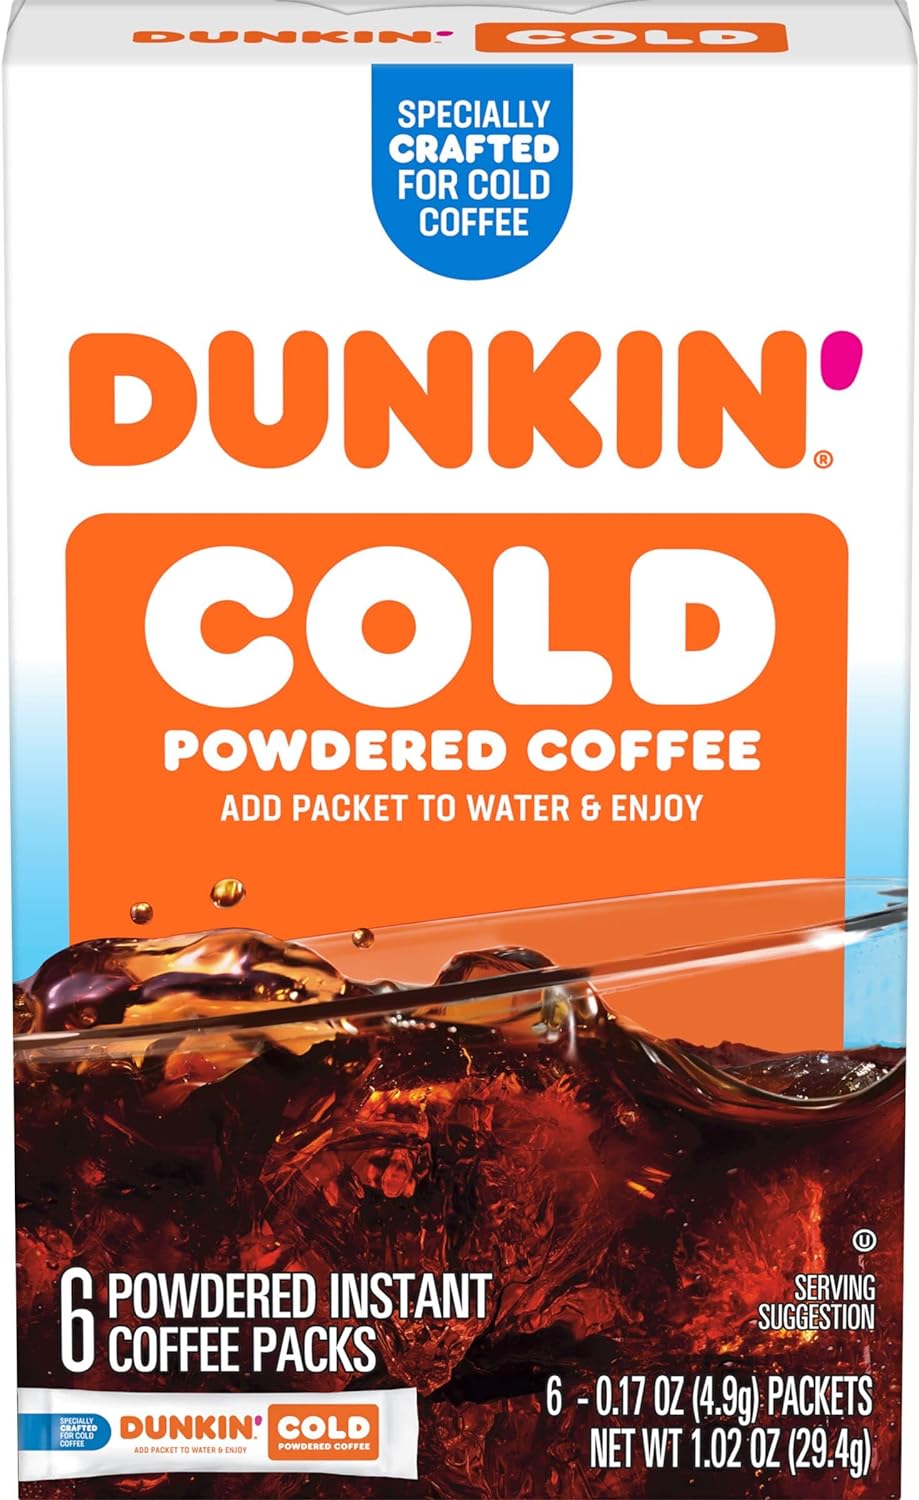 Dunkin' Cold Powdered Single Serve Instant Coffee Packs, 6 Count (Pack of 12)